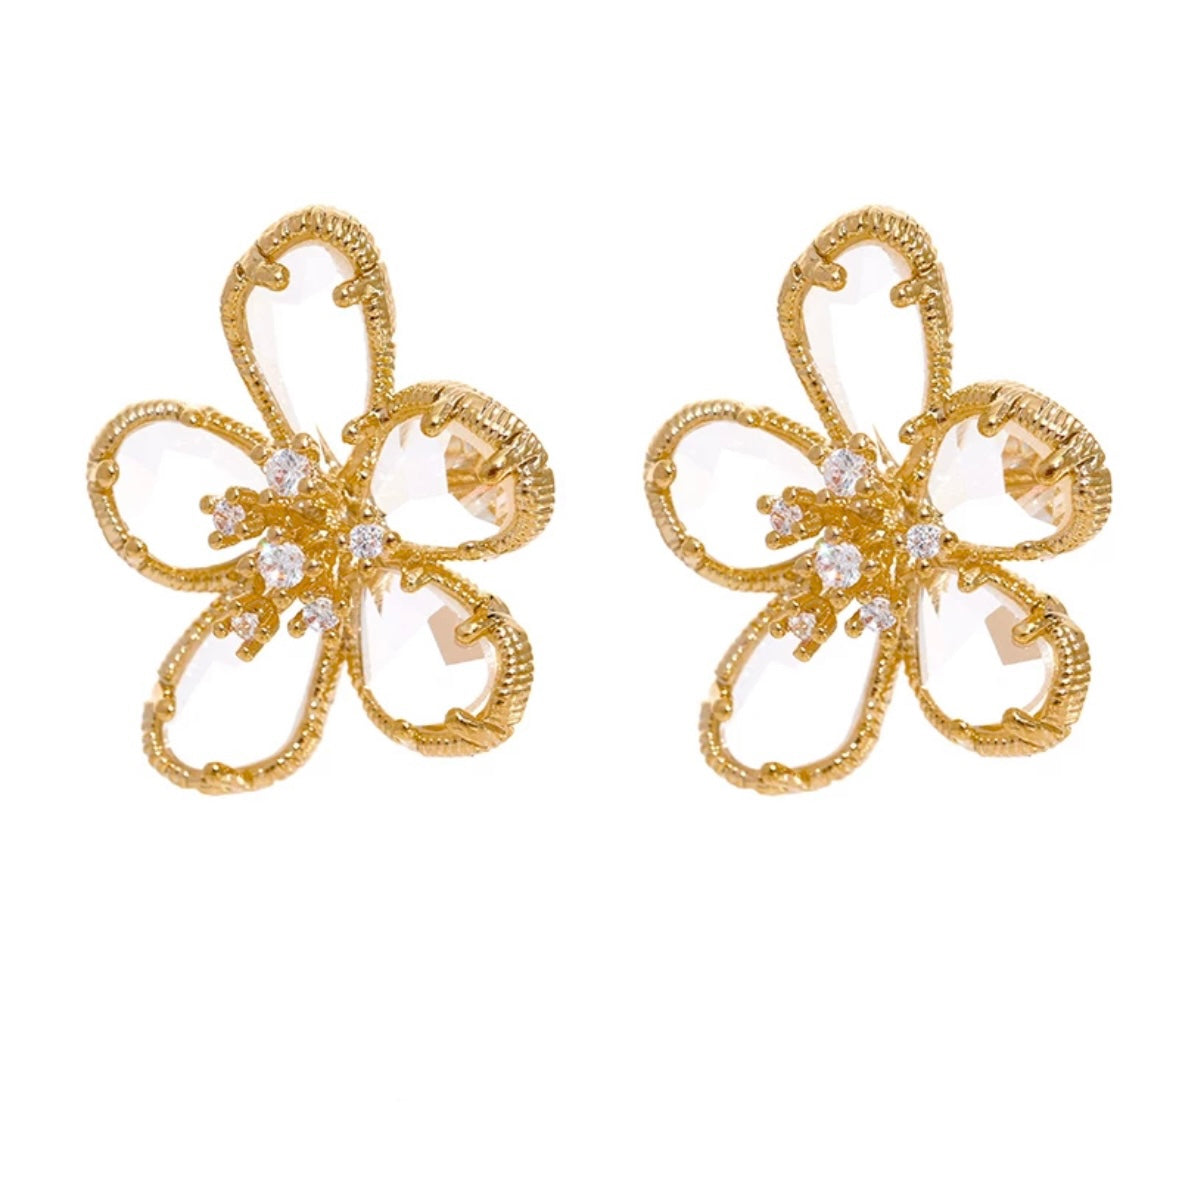 Small golden flower stud earrings with delicate, minimalist design